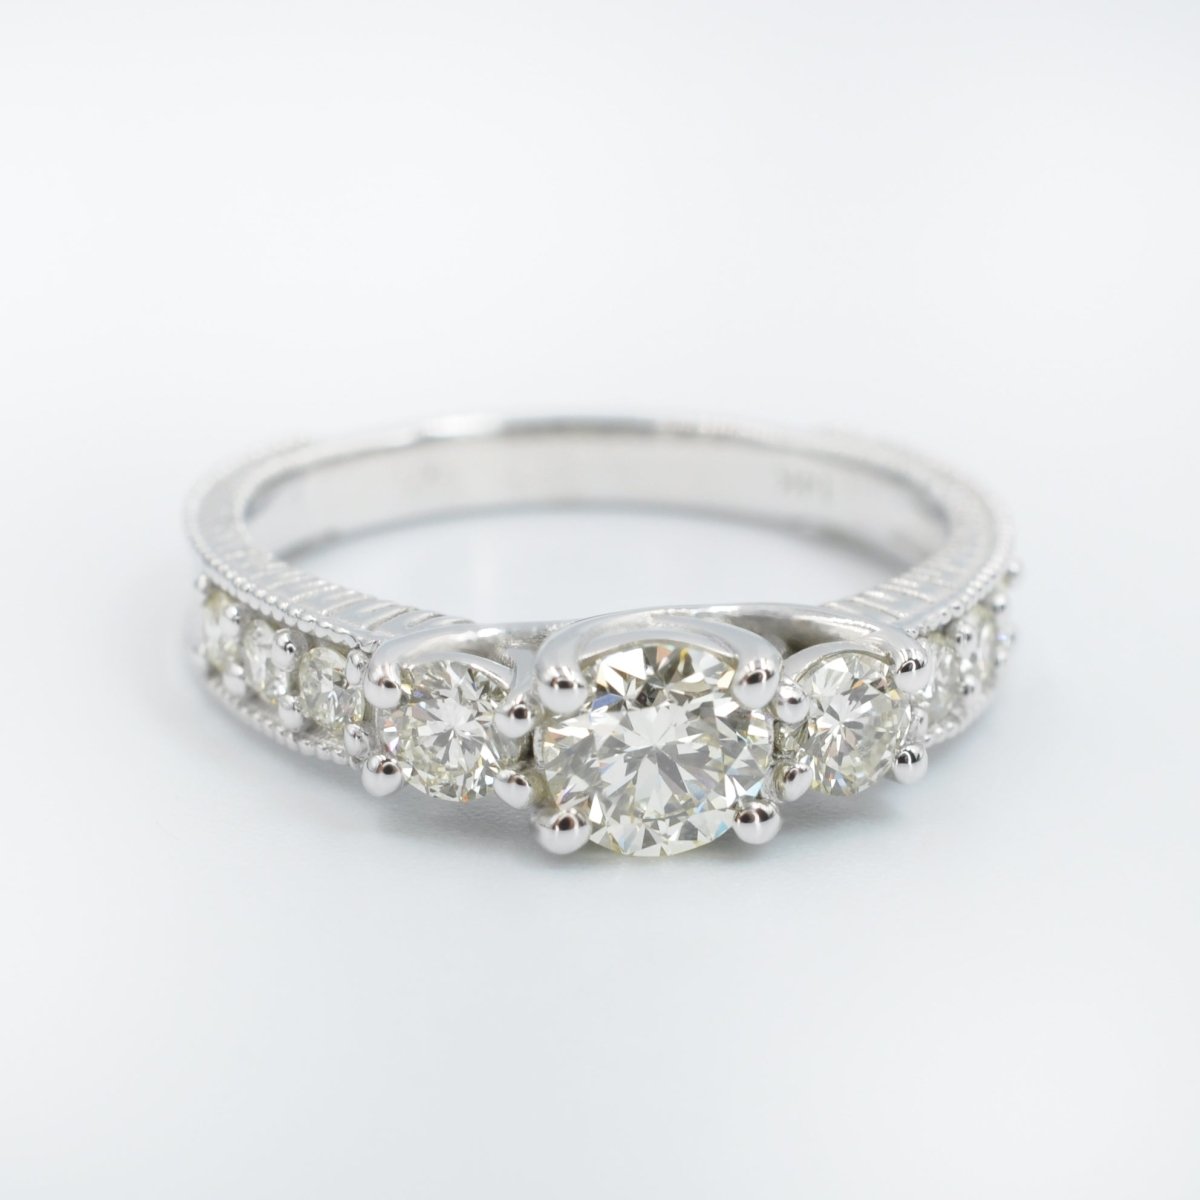 Certified 1.55 CT Round Cut Diamond Three Stone Ring in 14 KT White Gold - Primestyle.com